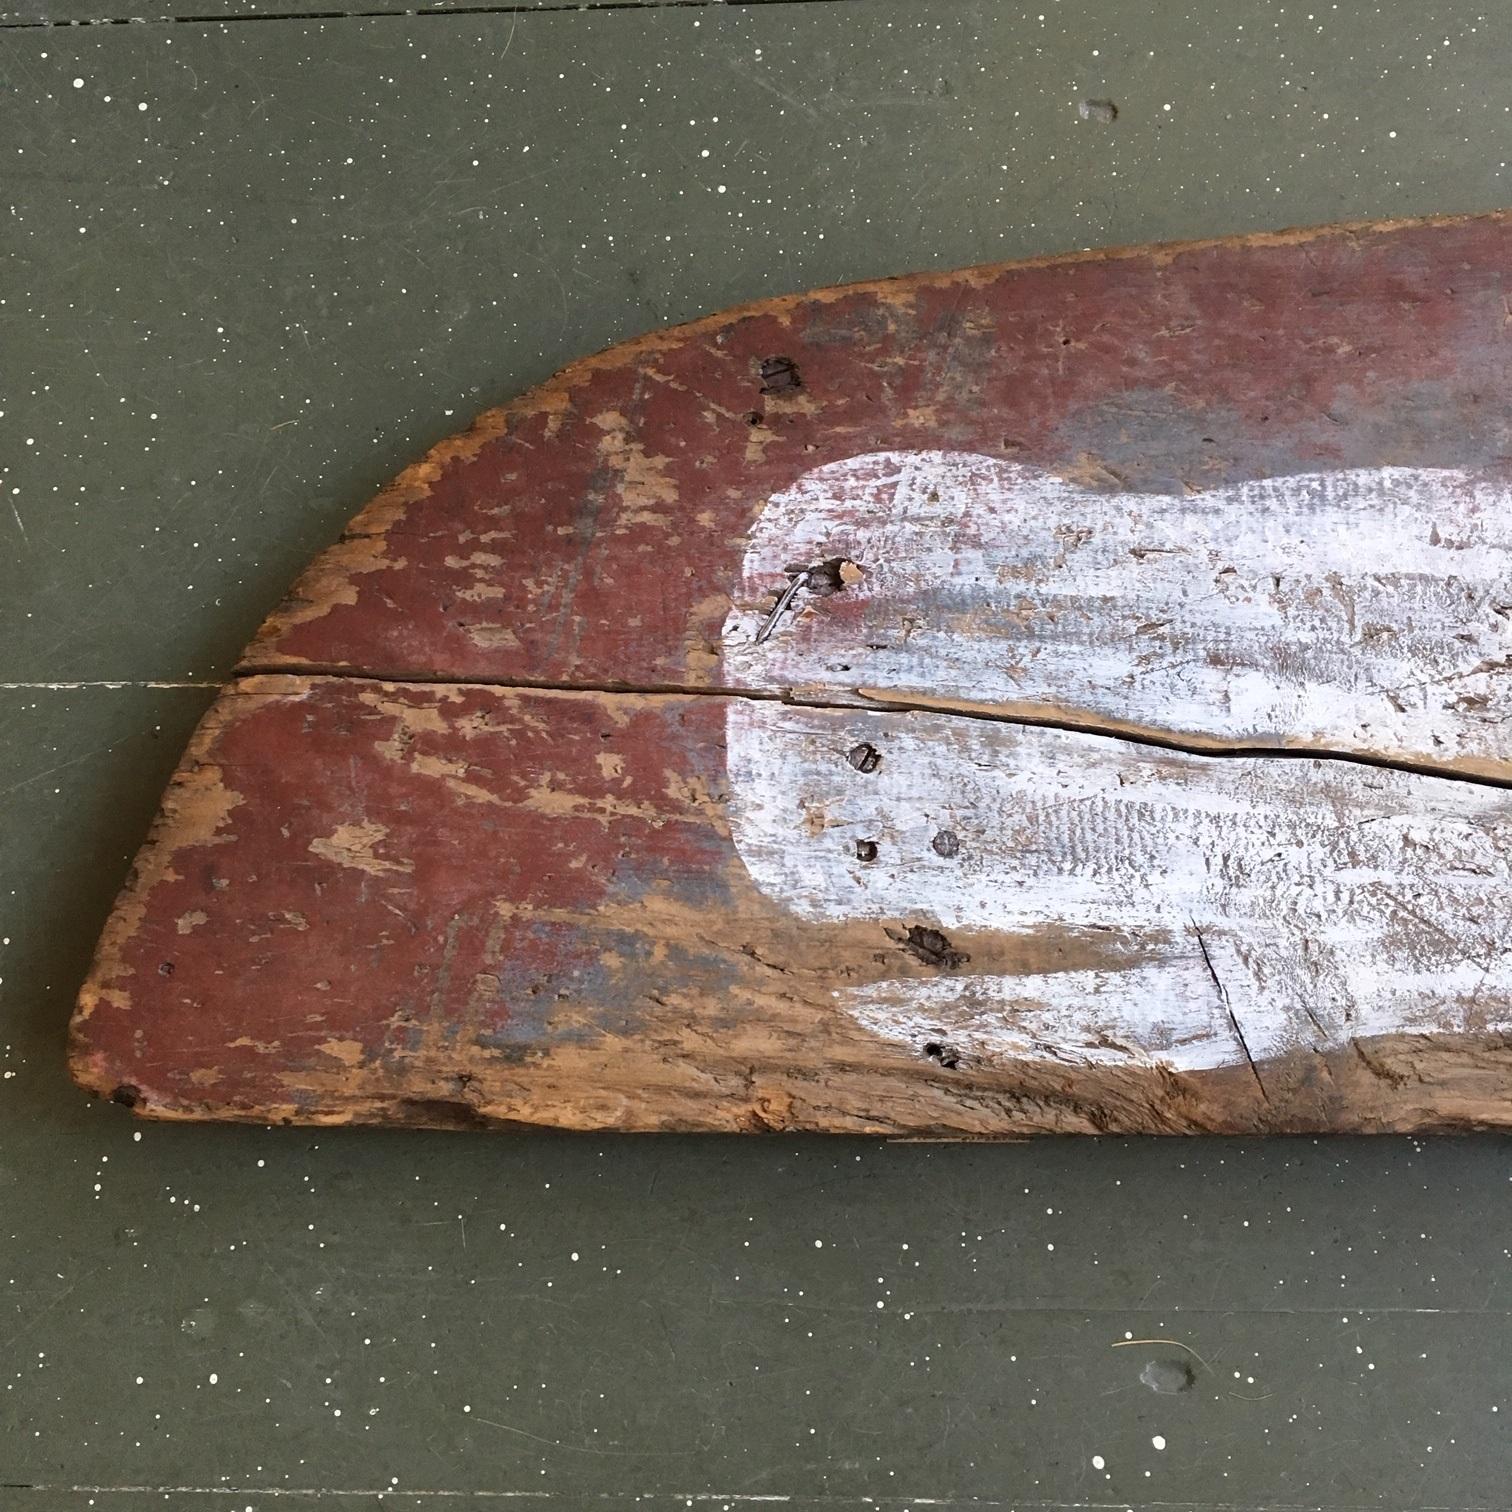 Antique Folk Art whale decorated panel from a wheel barrow. A 19th century primitive wooden side panel in original red paint, well worn, with a sperm whale painted in white wash. The whale is surely later, but appears to have very good age and has